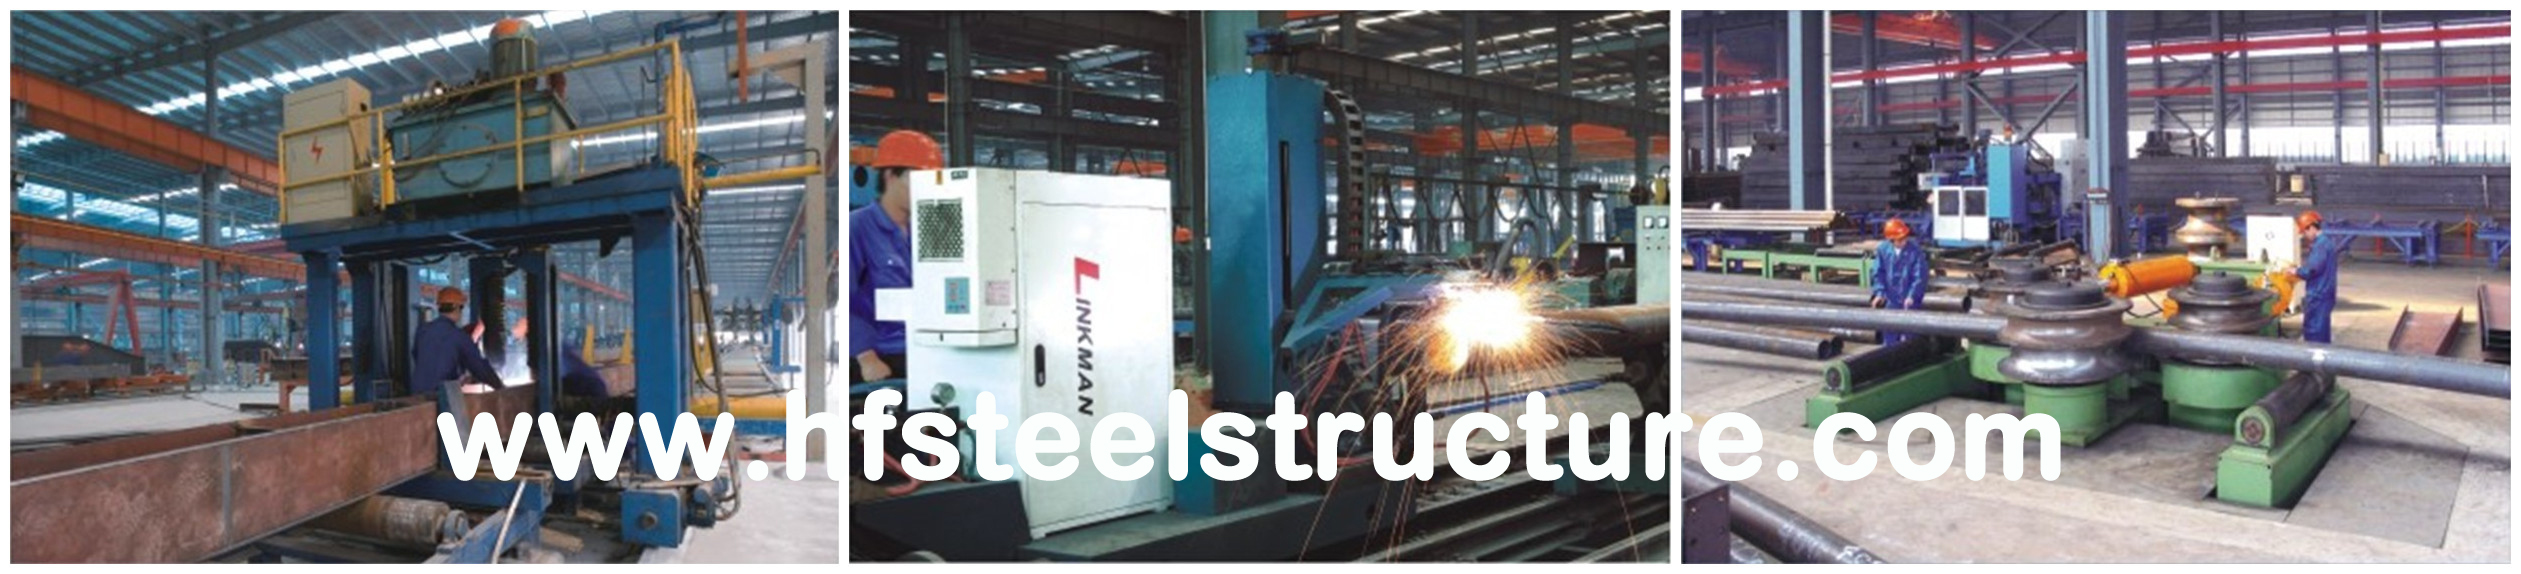 Prefabricated Light Structural Steel Fabrications Construction Building